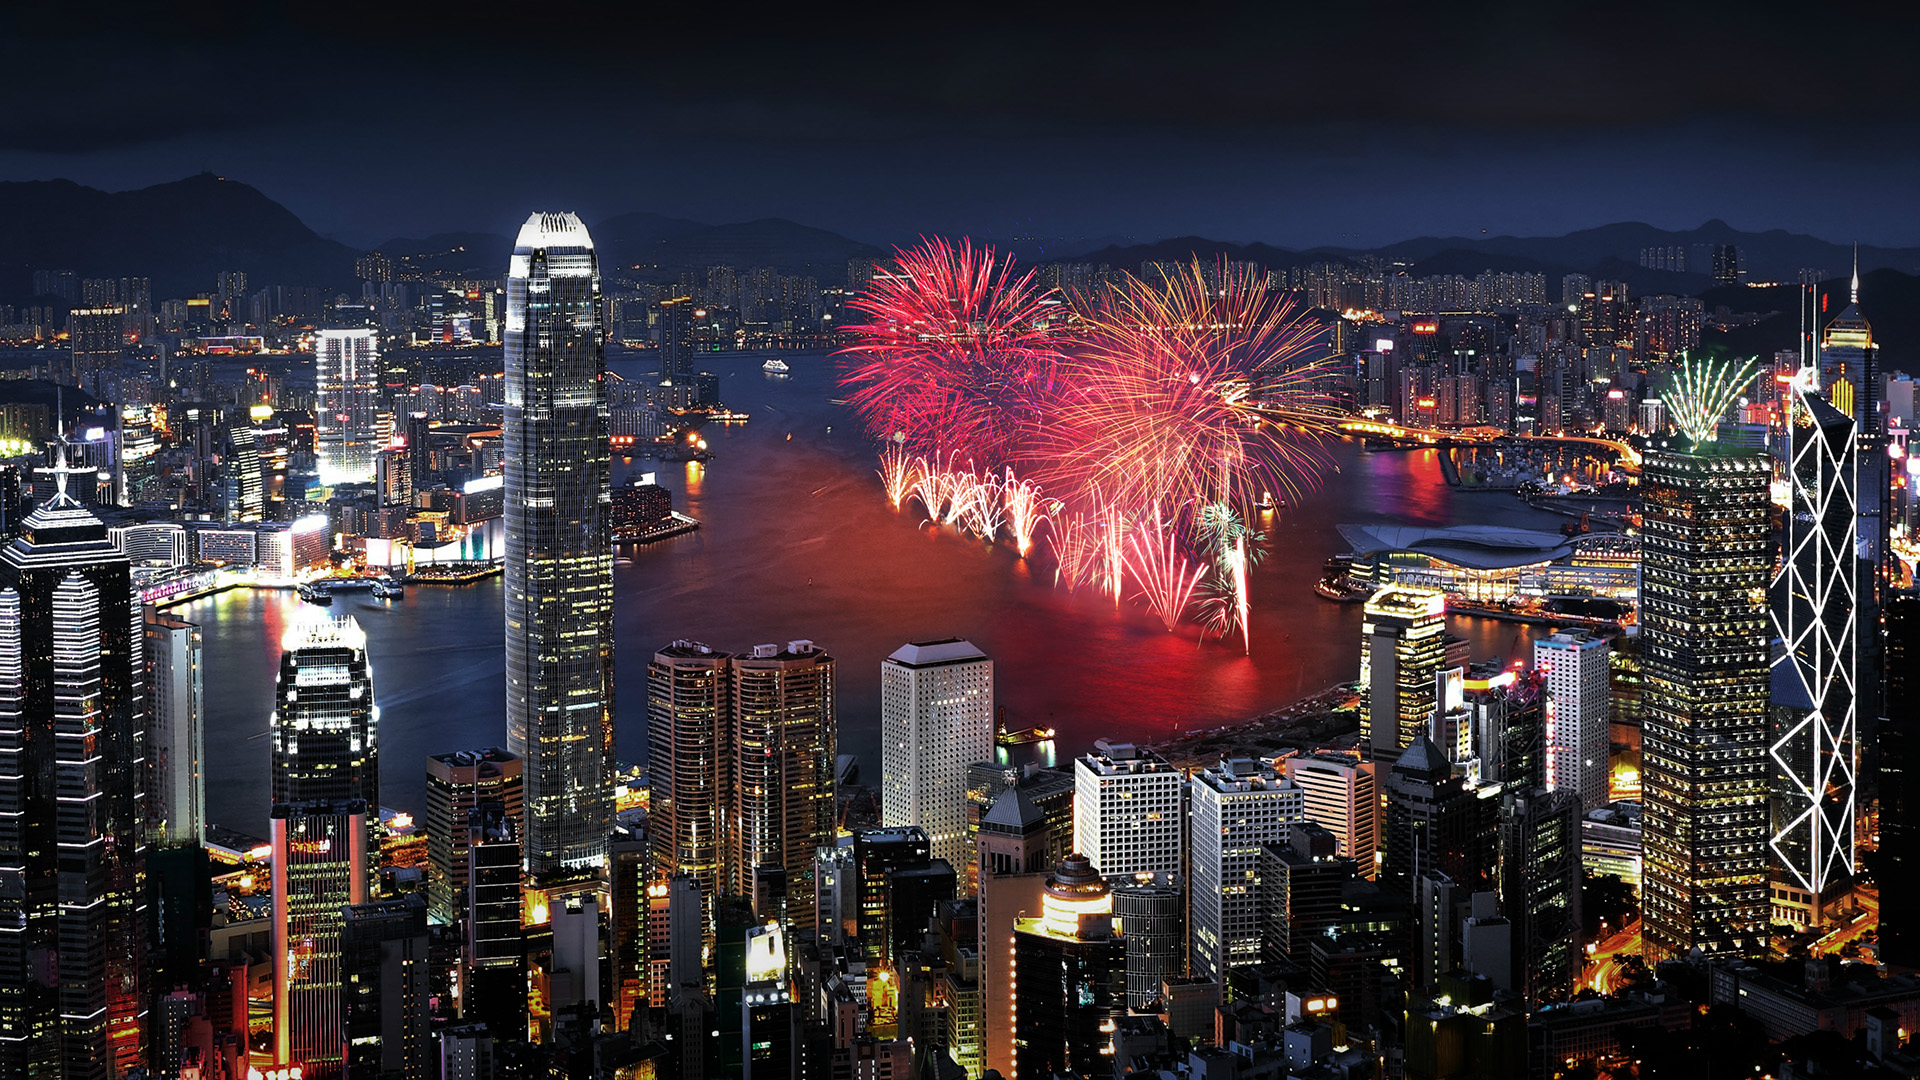 Night Vibes Hong Kong: Vibrant fireworks return to Victoria Harbour's sky | Hong Kong Tourism Board